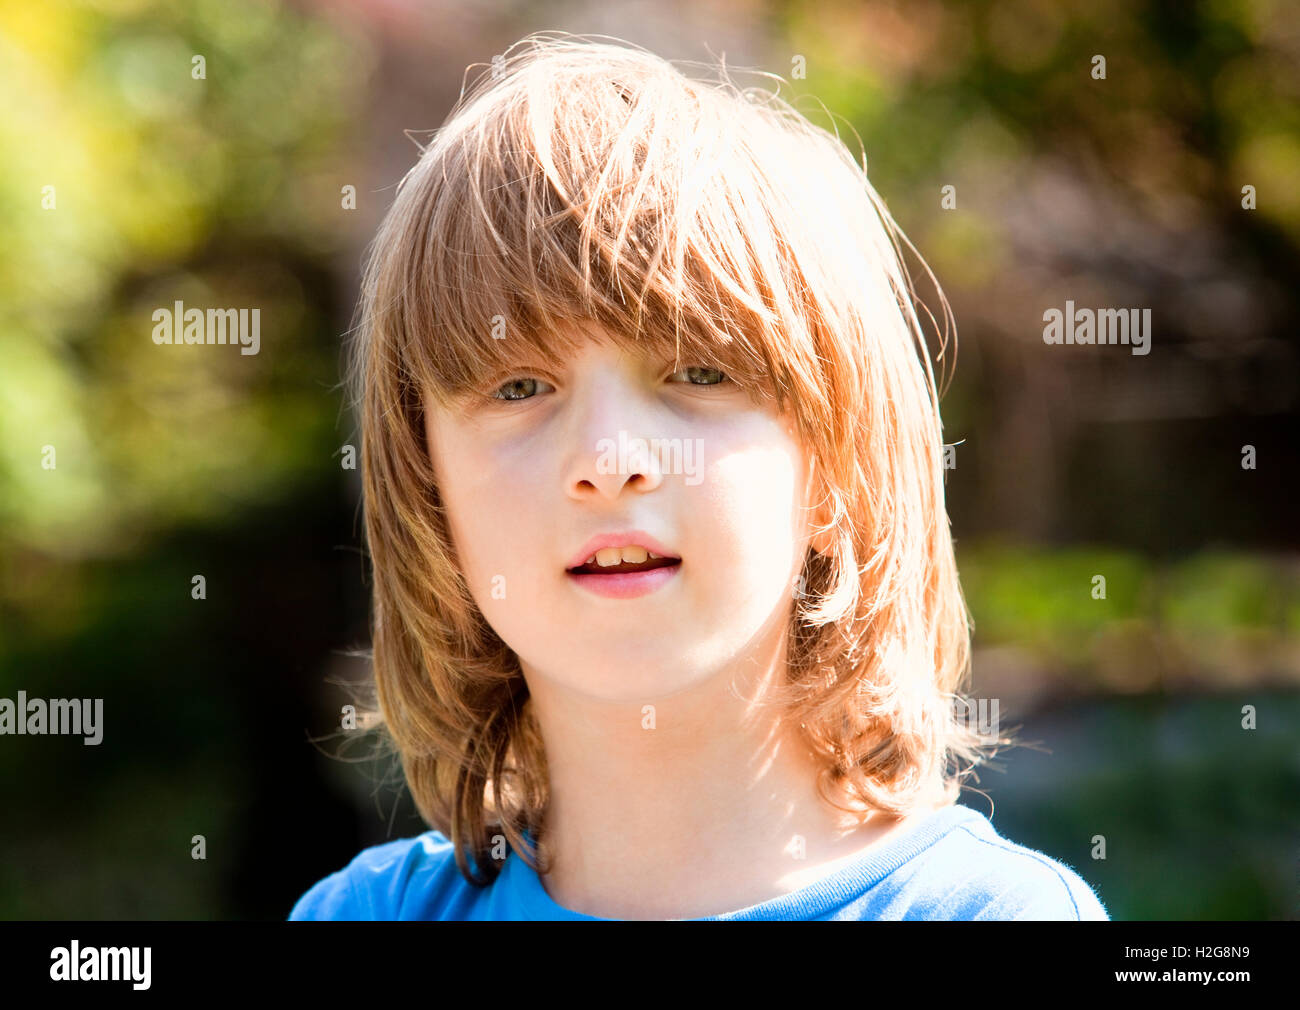 Portrait of a Boy with Blond Hair Outdoors Stock Photo